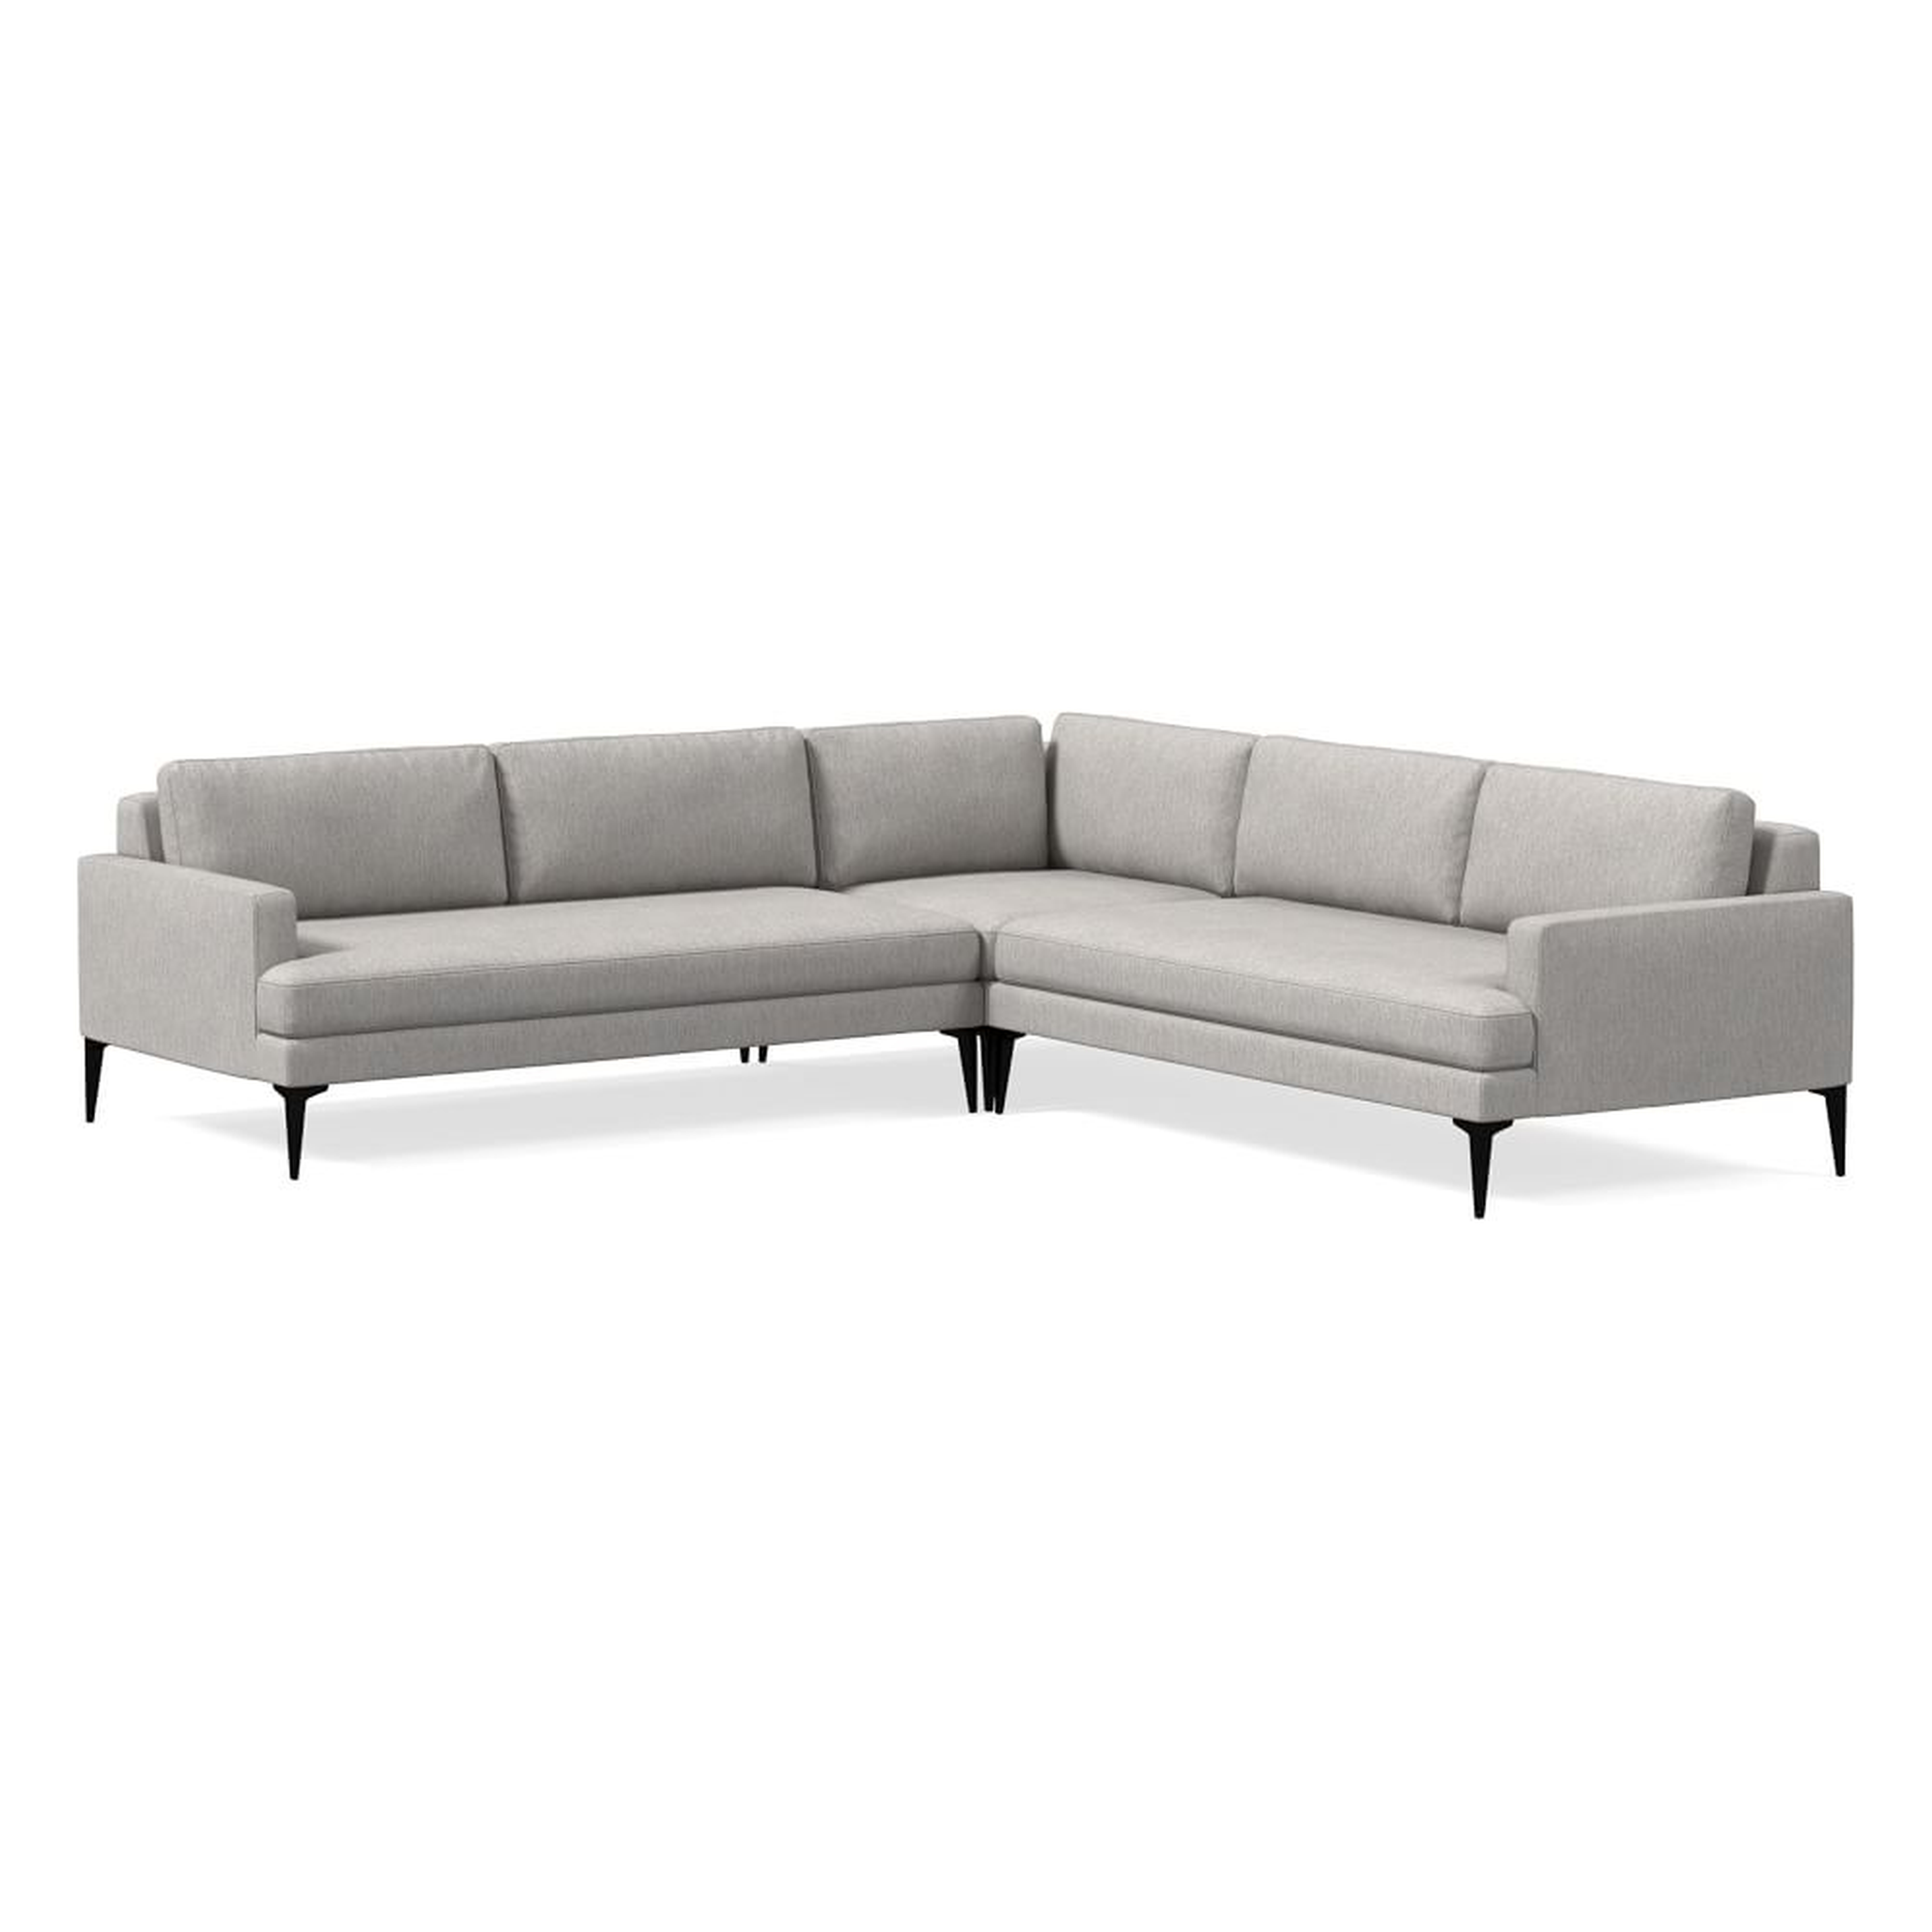 Andes 105" Multi-Seat 3-Piece L-Shaped Sectional, Standard Depth, Performance Coastal Linen, Storm Gray, Dark Pewter - West Elm